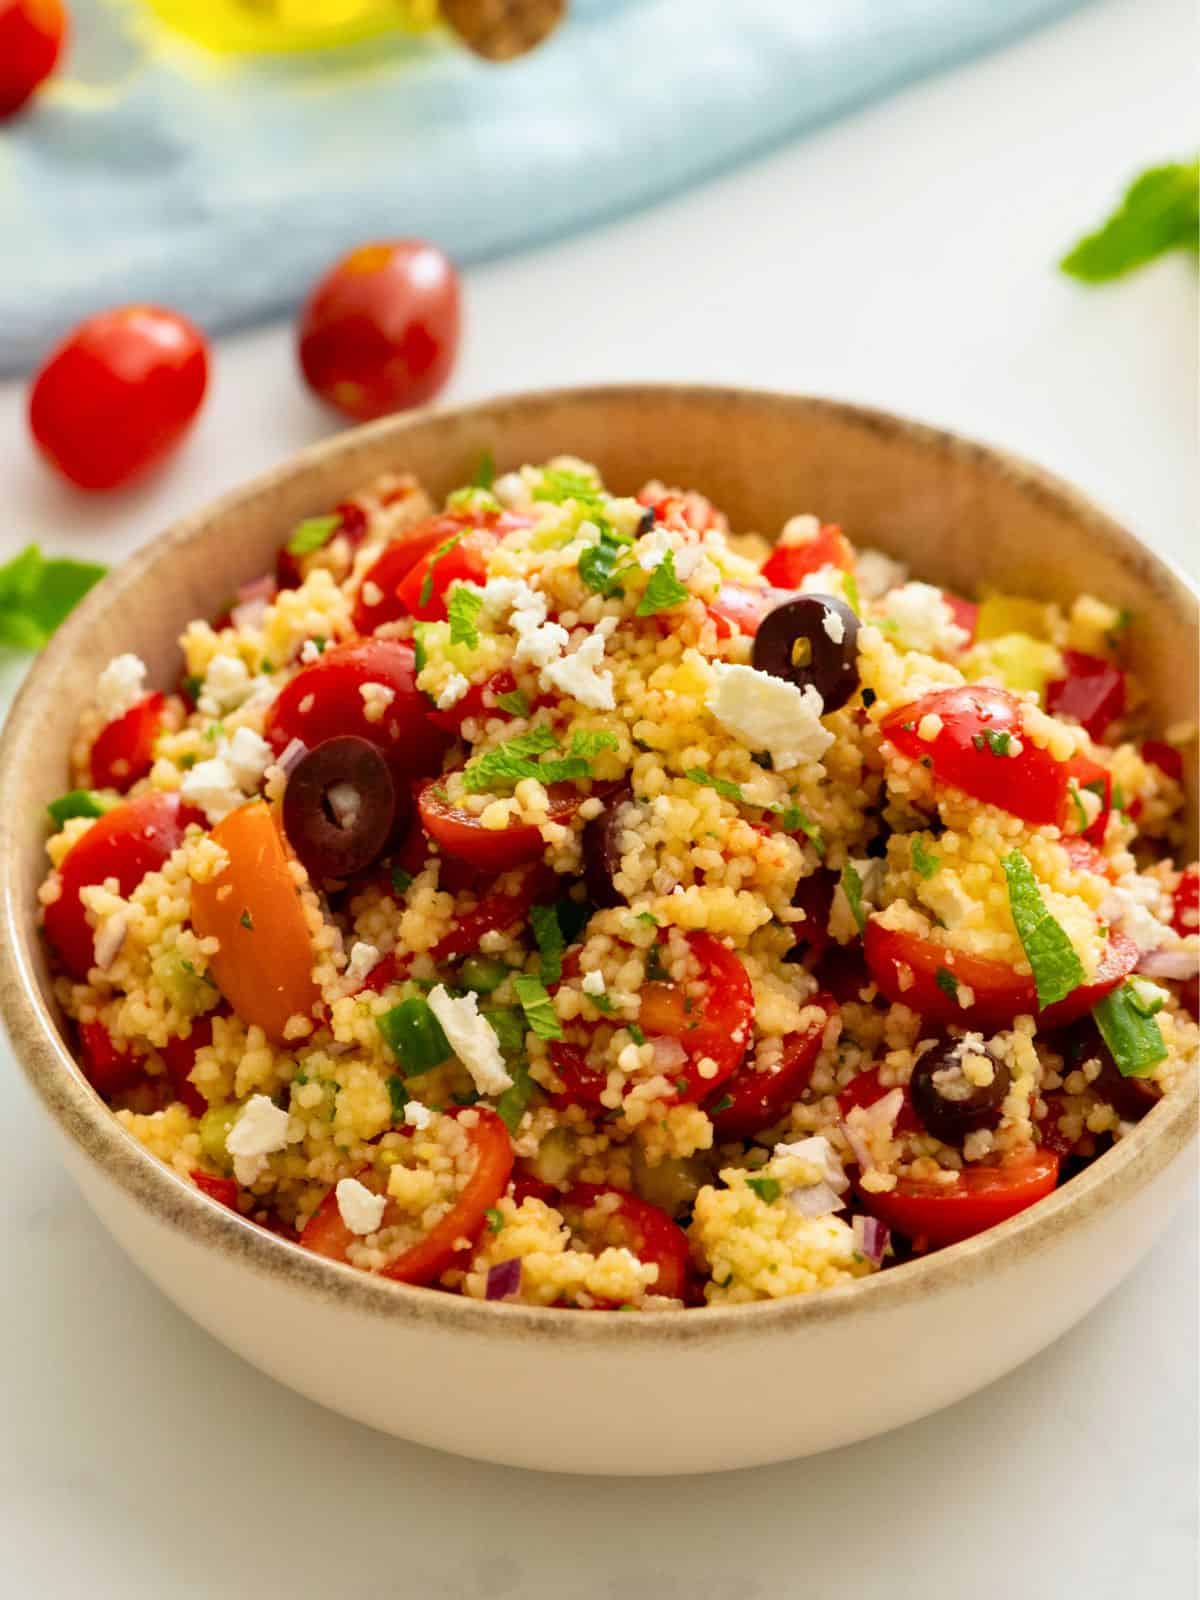 Cold Couscous Salad made with olives, tomatoes, and feta.